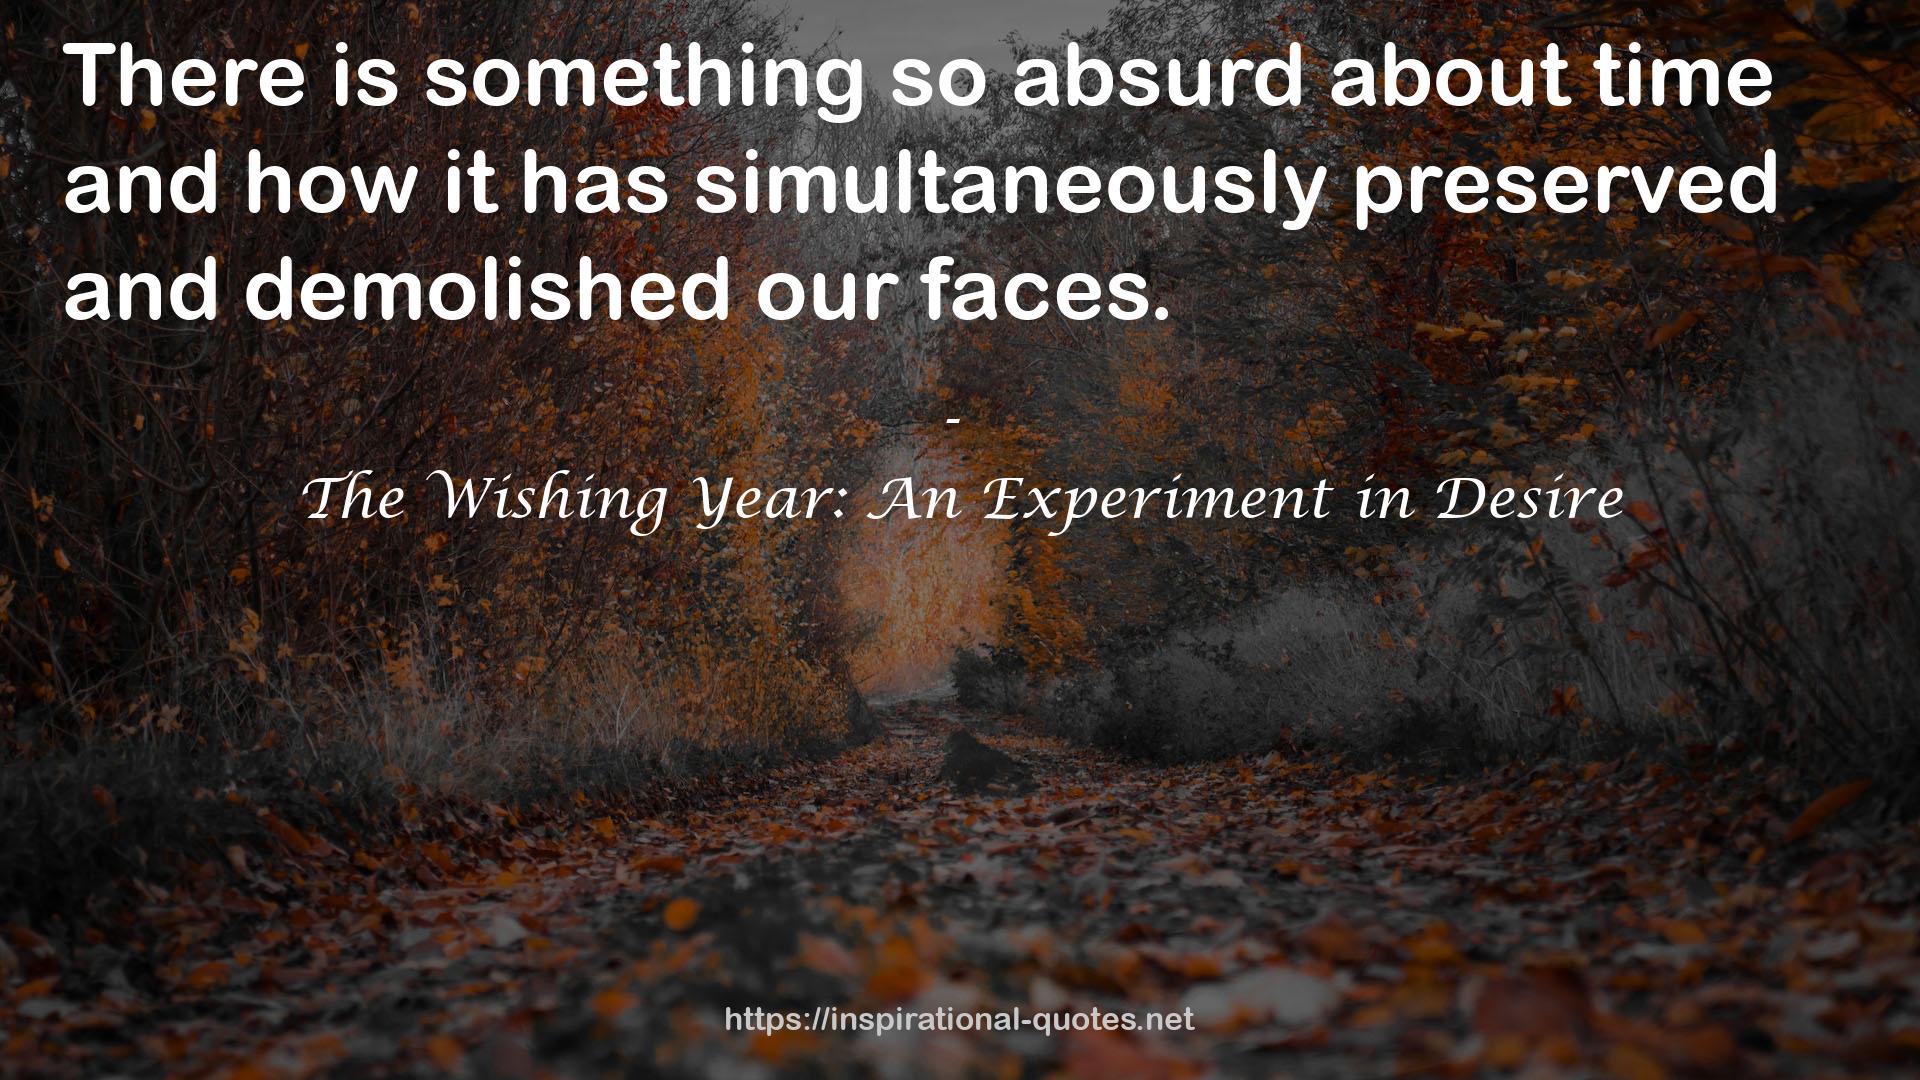 The Wishing Year: An Experiment in Desire QUOTES